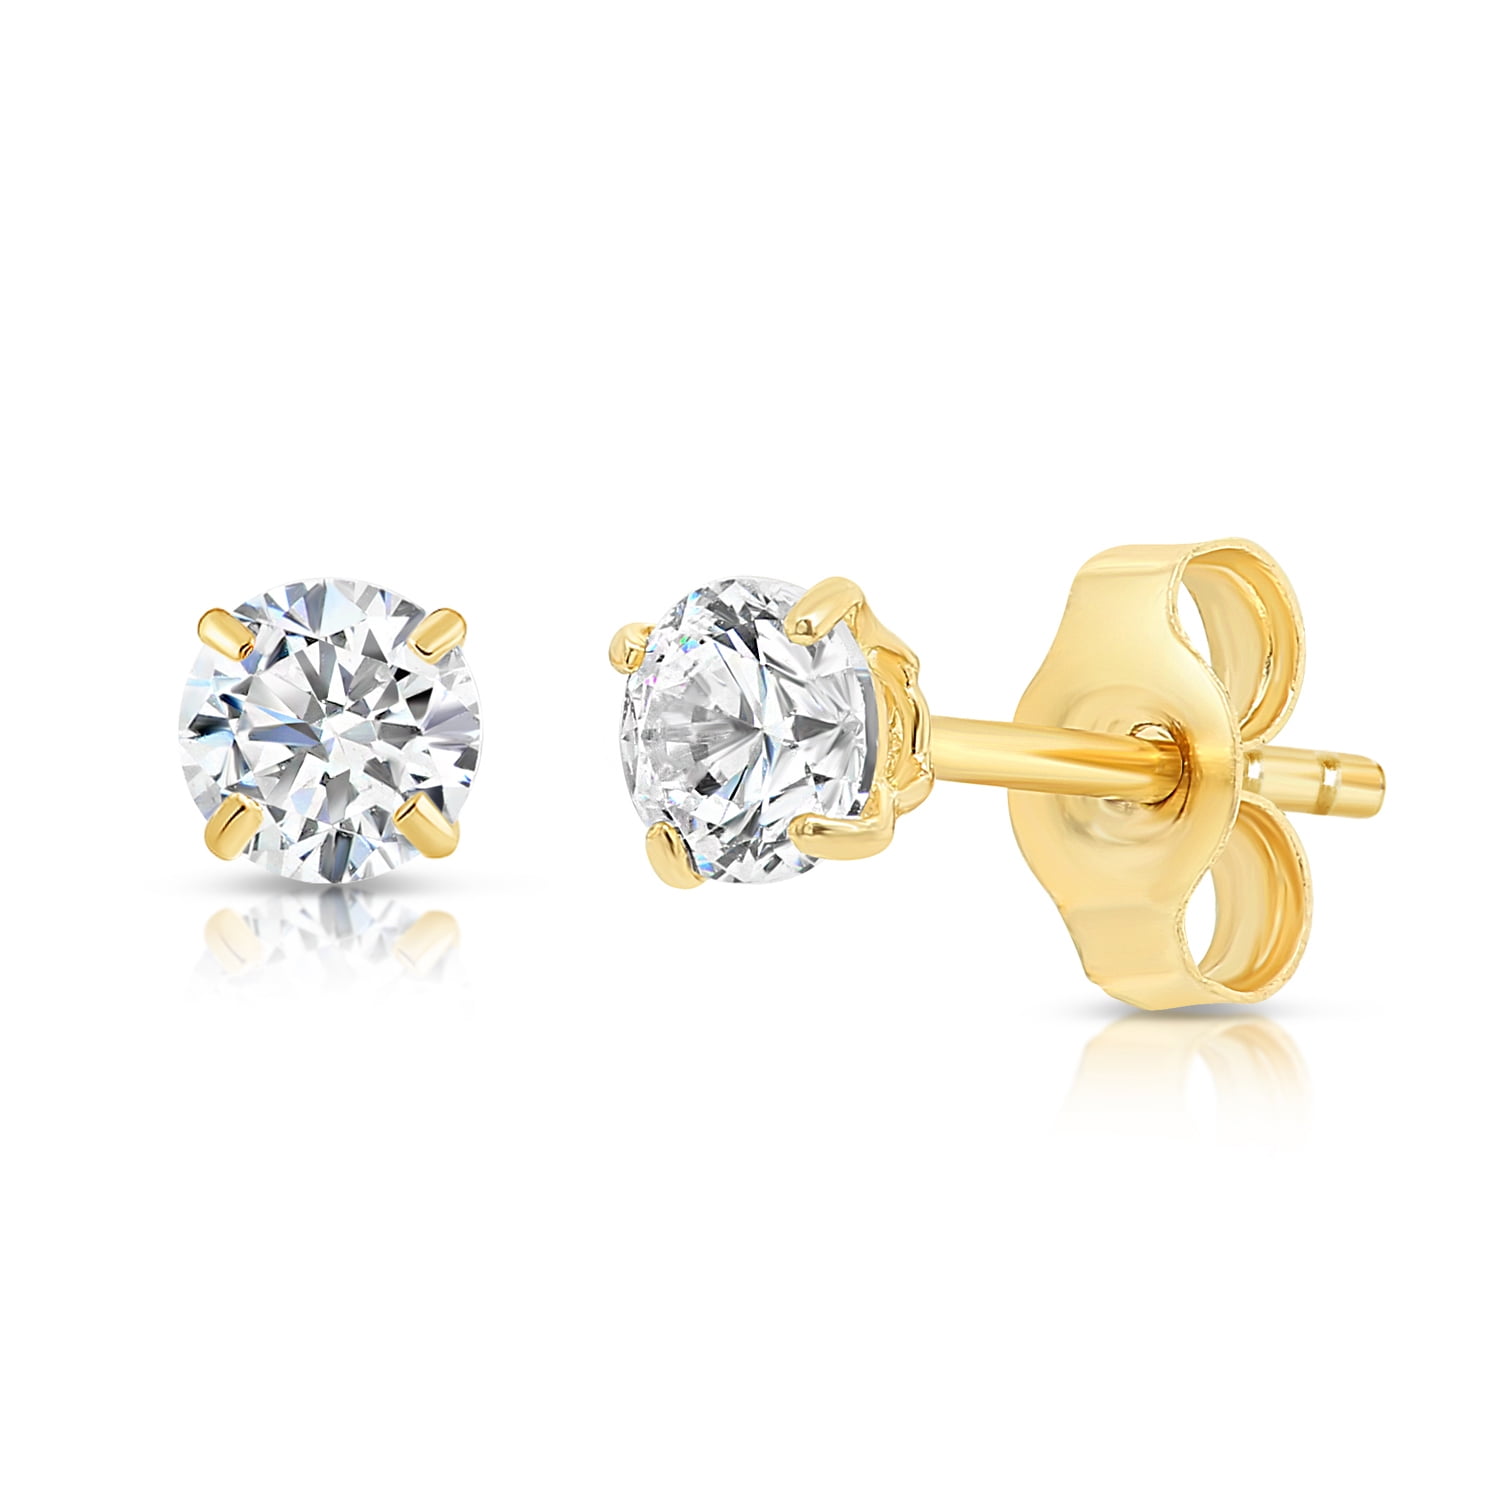 9 x 9 mm 14k REAL Yellow Gold Heart Pave Setting CZ Earrings with Push Back 